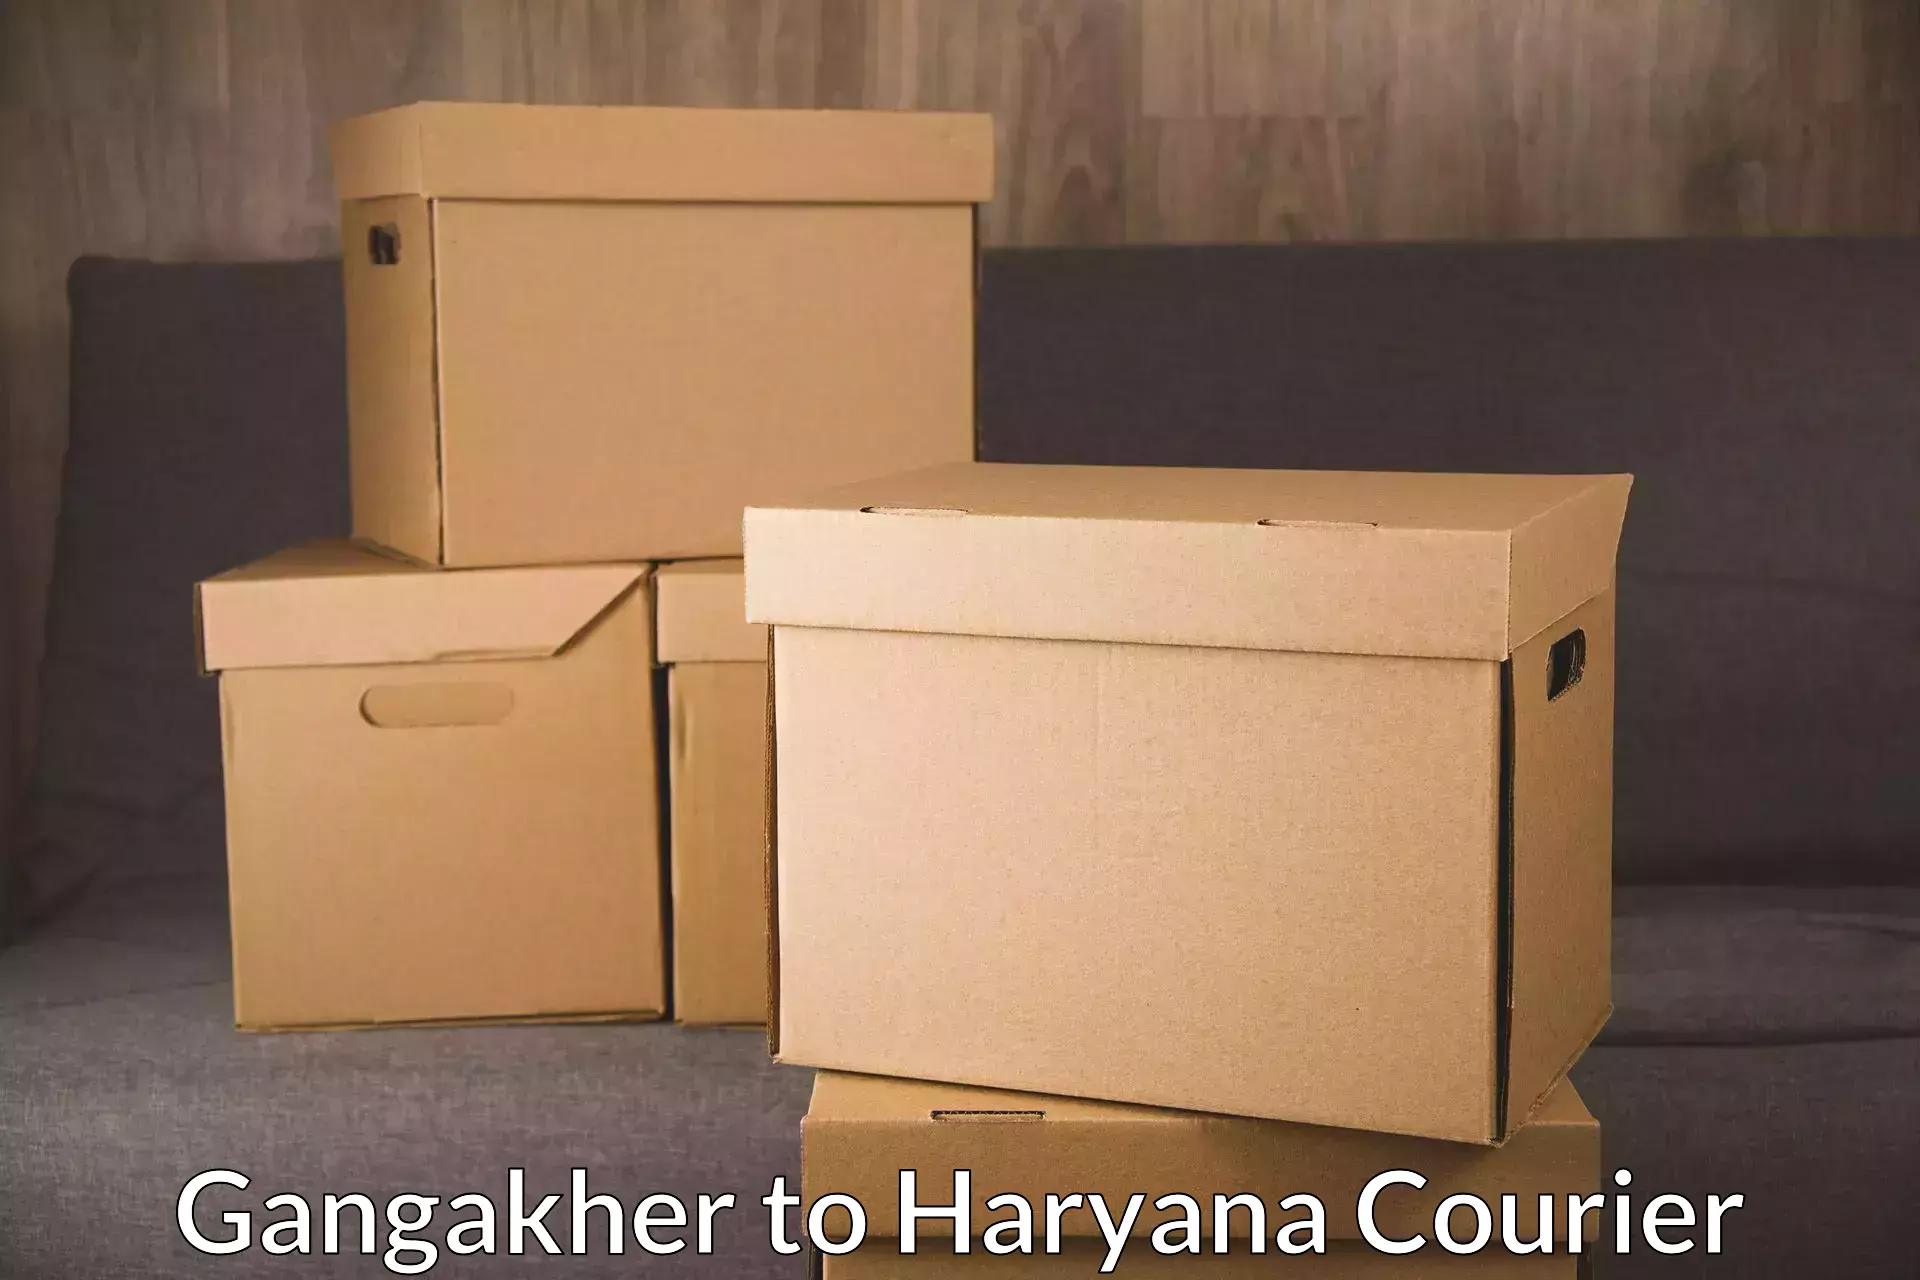 Sustainable delivery practices Gangakher to Haryana